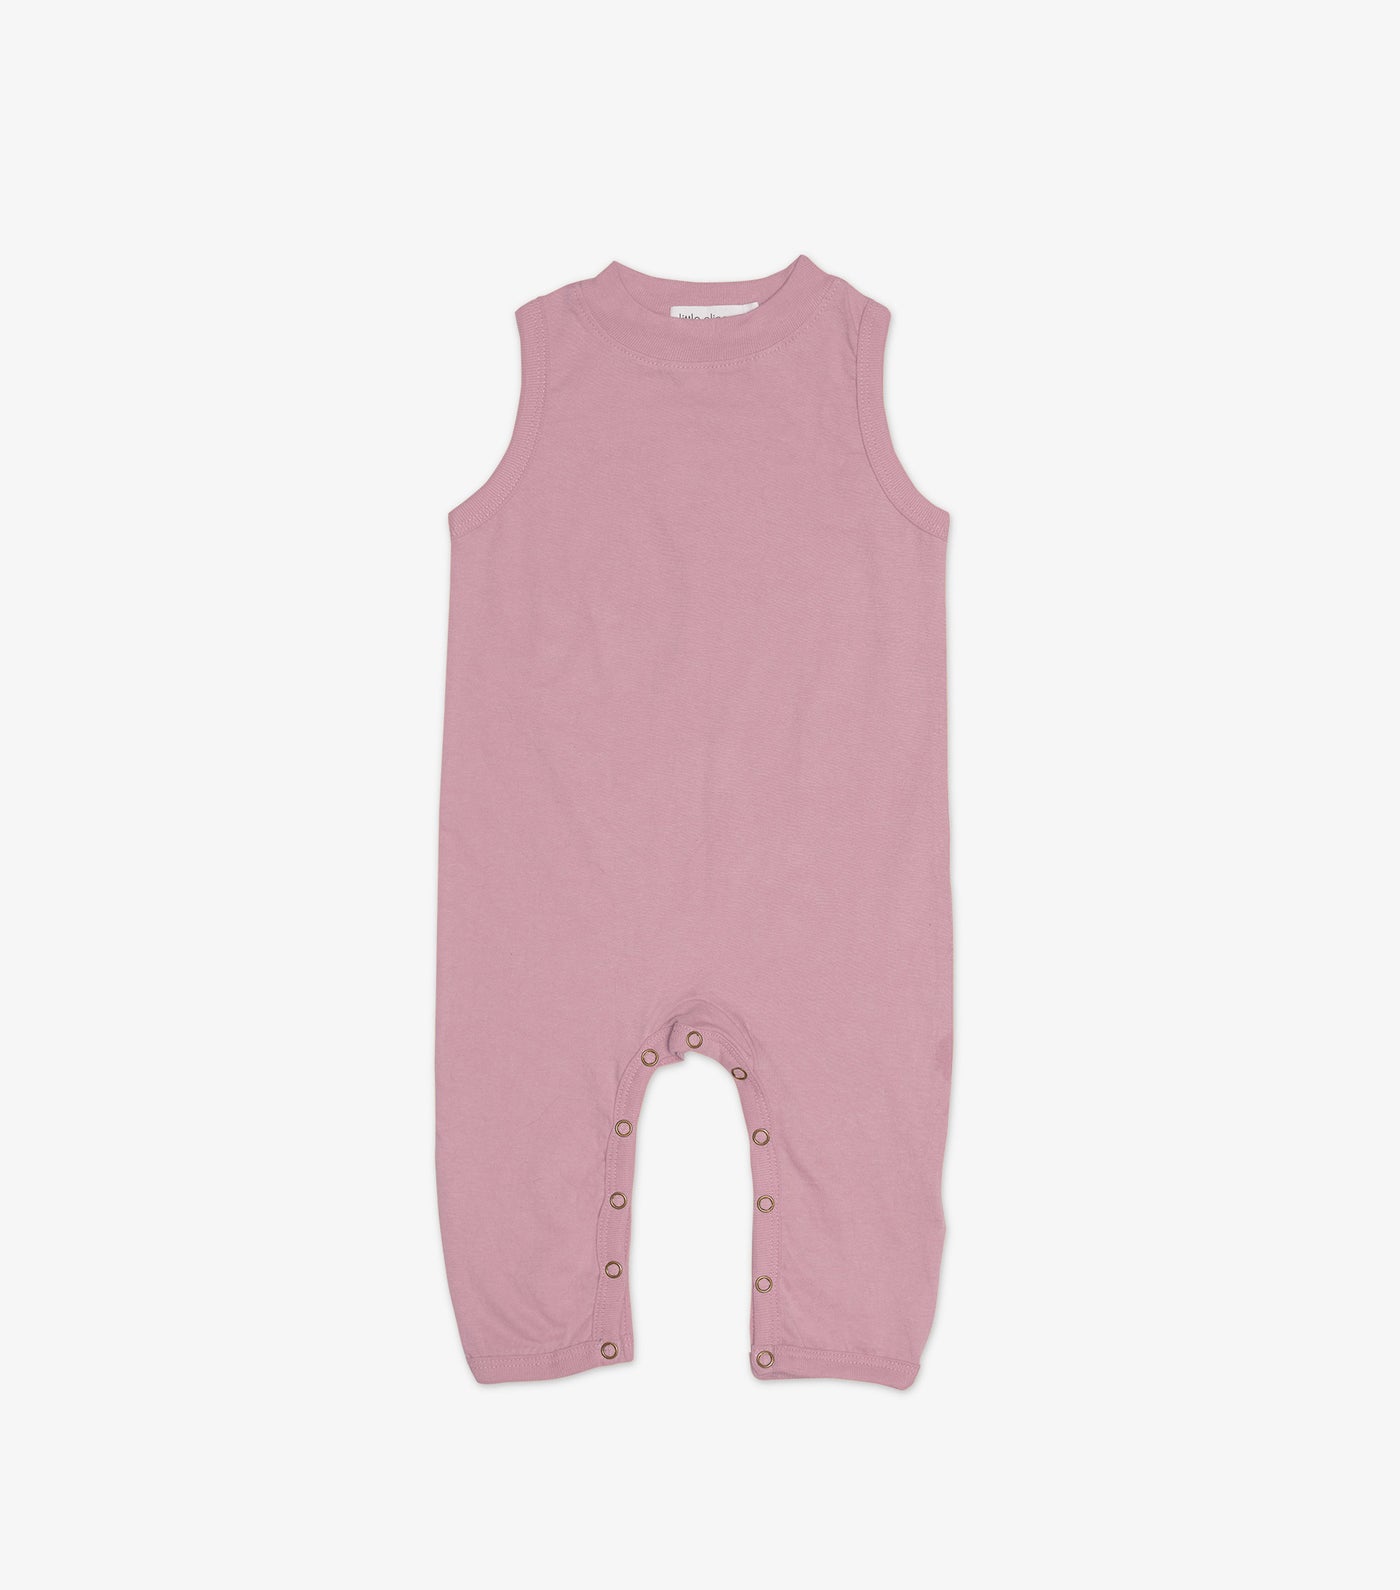 3 Pack of Baby Rompers